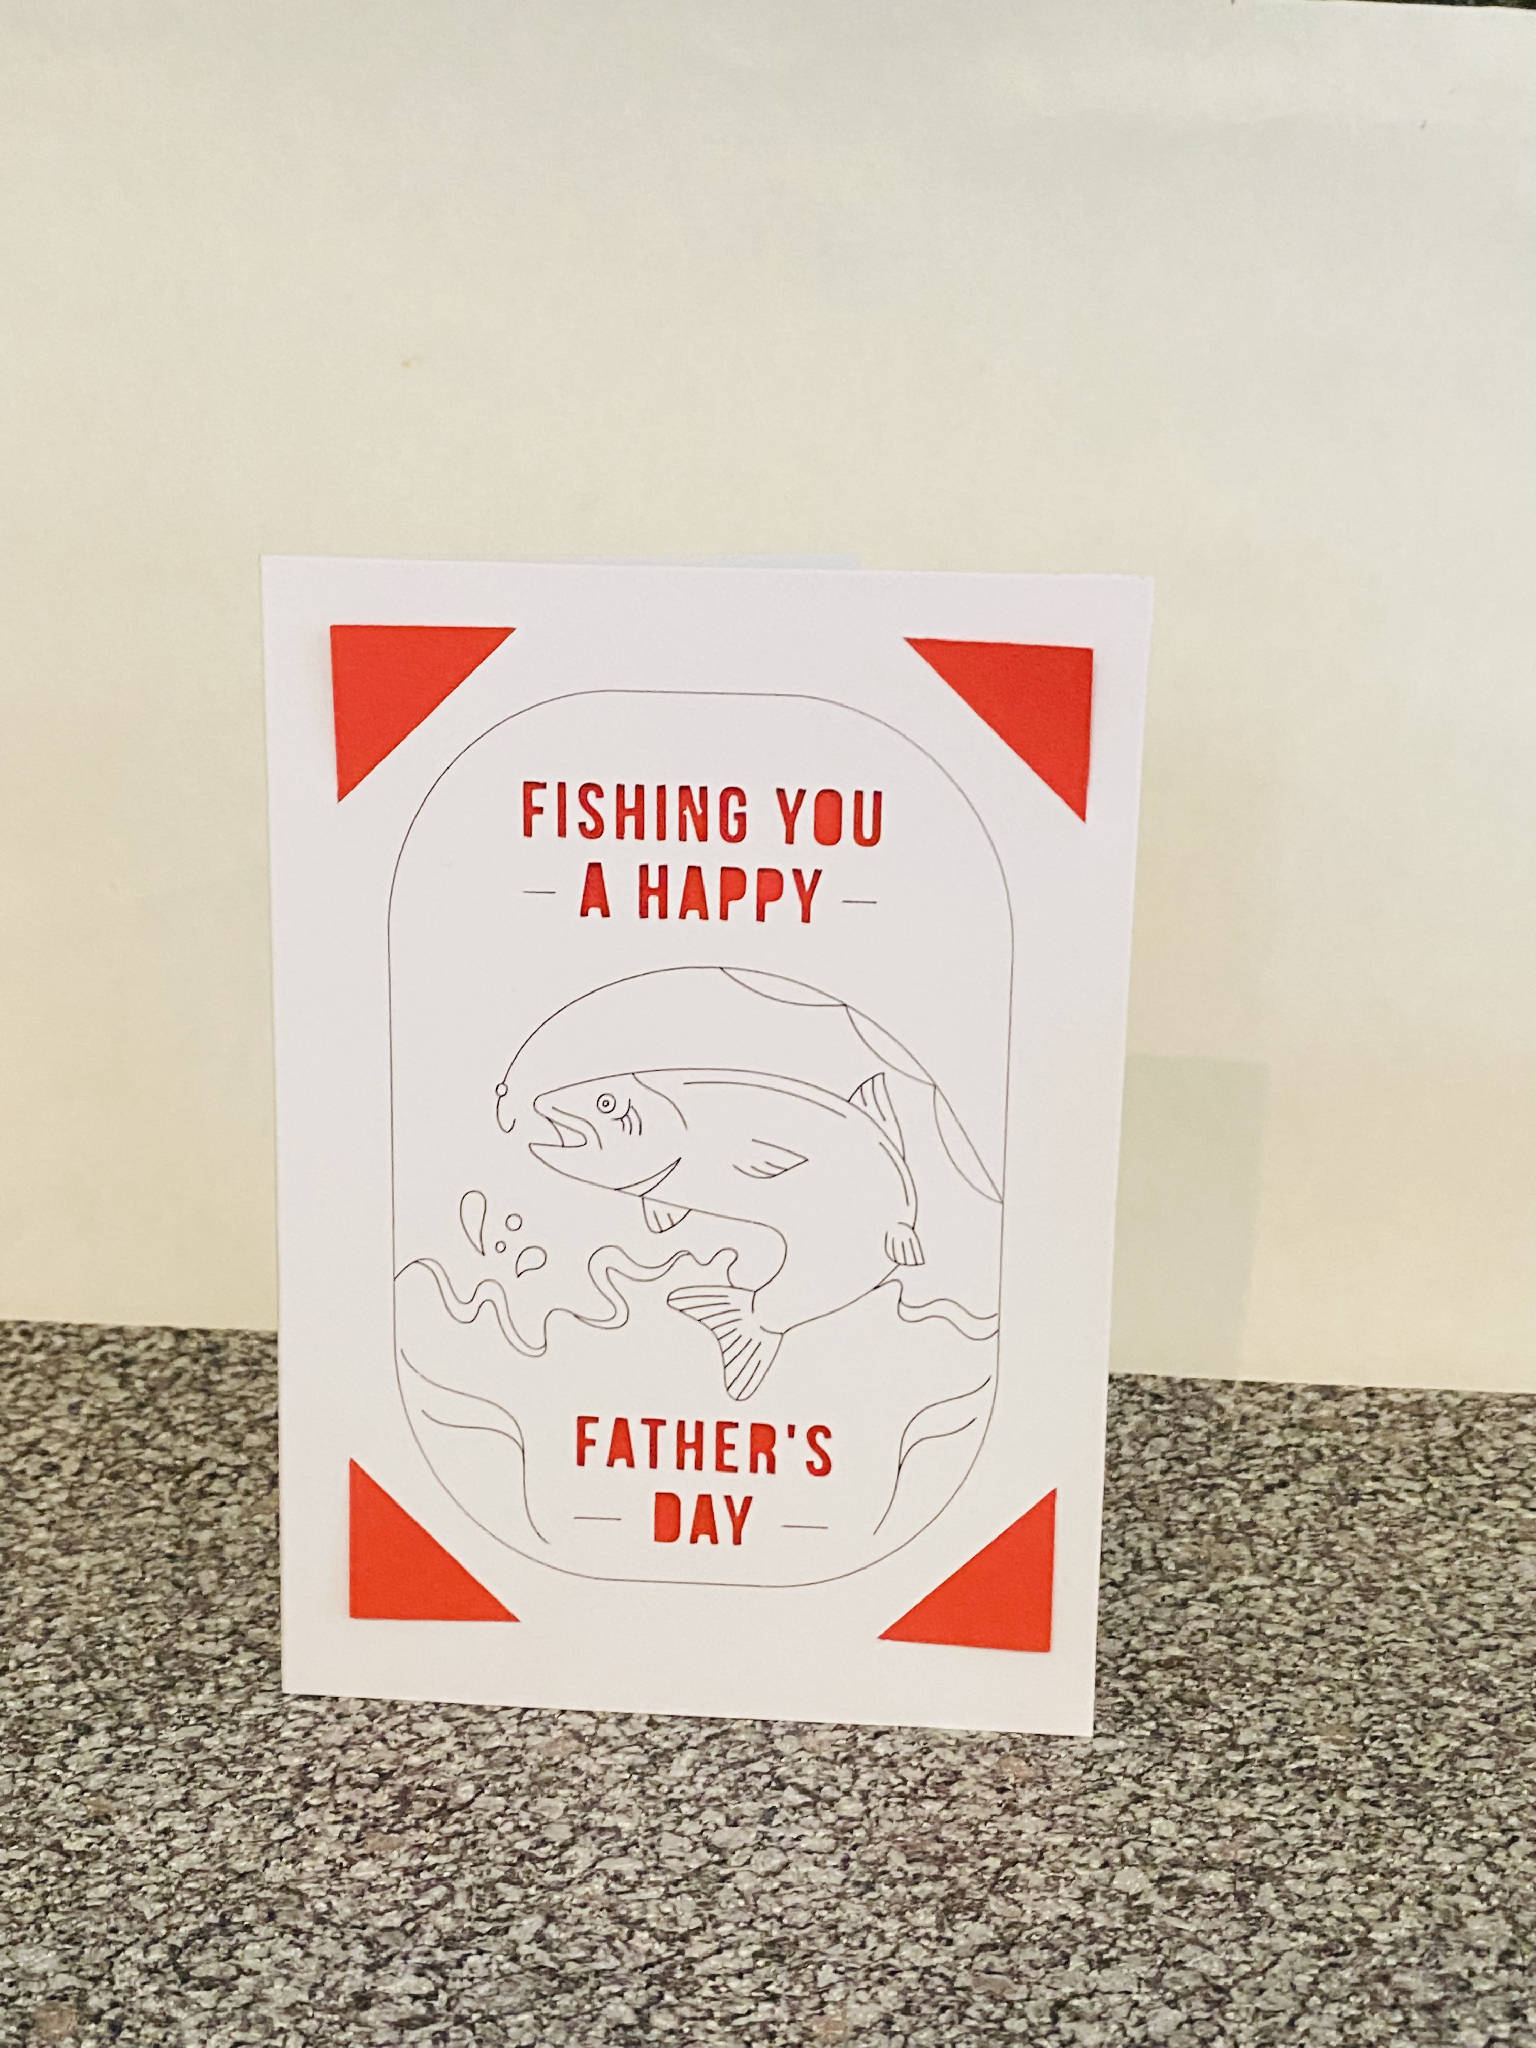 Fishing you a Happy Father’s Day - Red